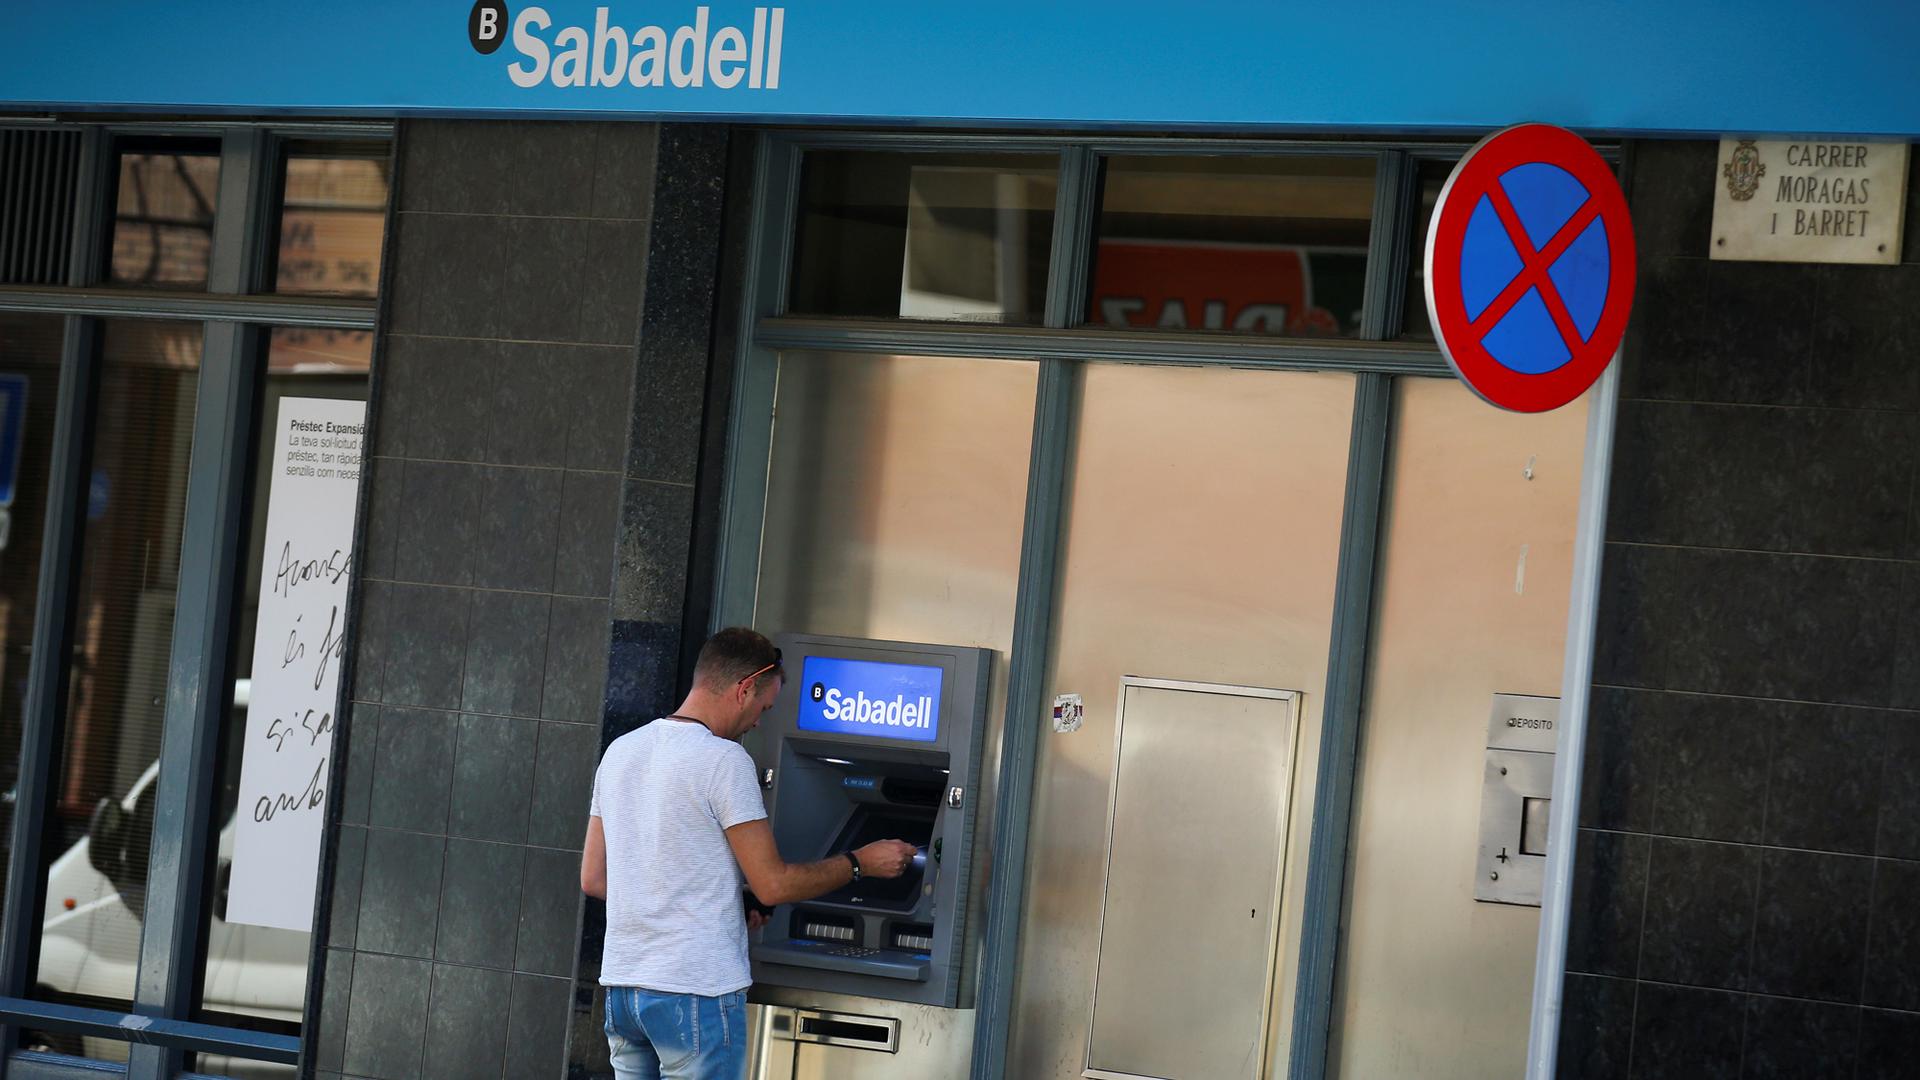 A man uses a cashpoint at a Sabadell bank branch in Pineda de Mar, north of Barcelona.